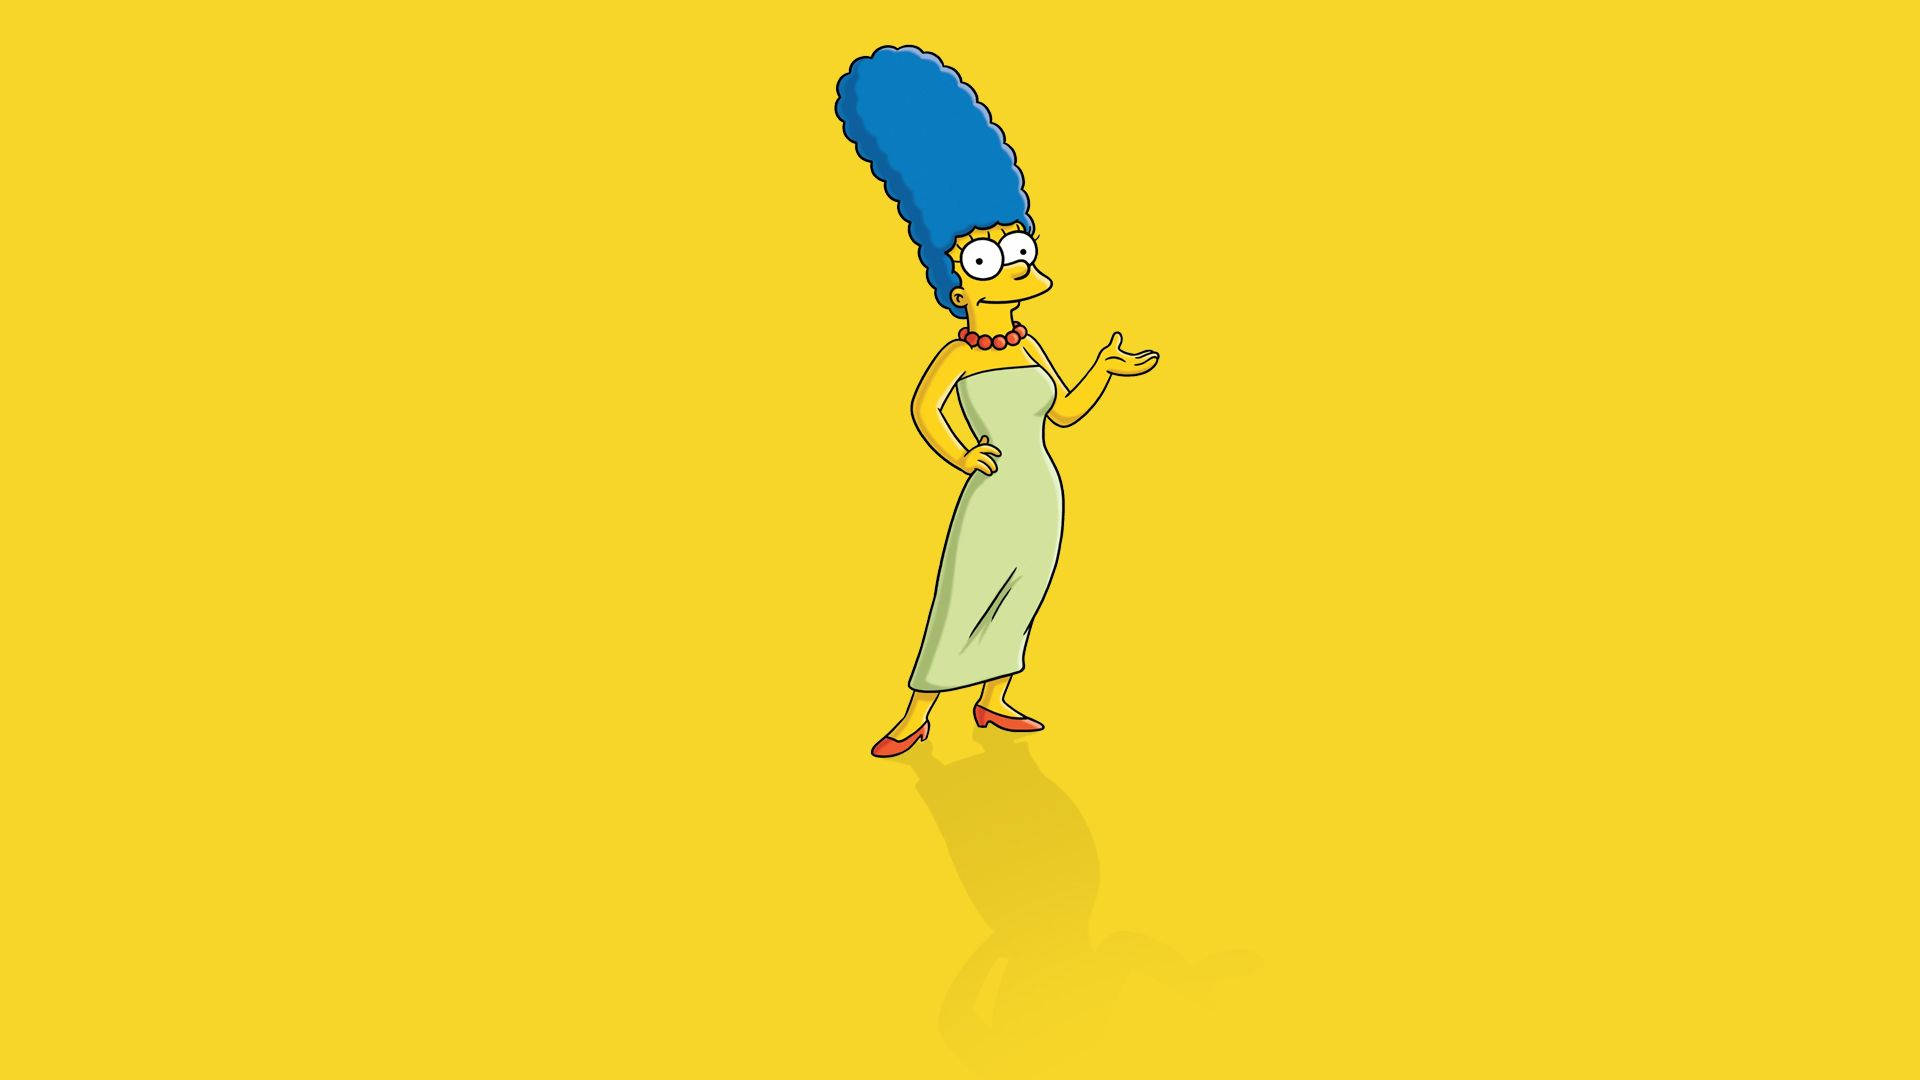 Top 999+ Marge Simpson Wallpaper Full HD, 4K✅Free to Use